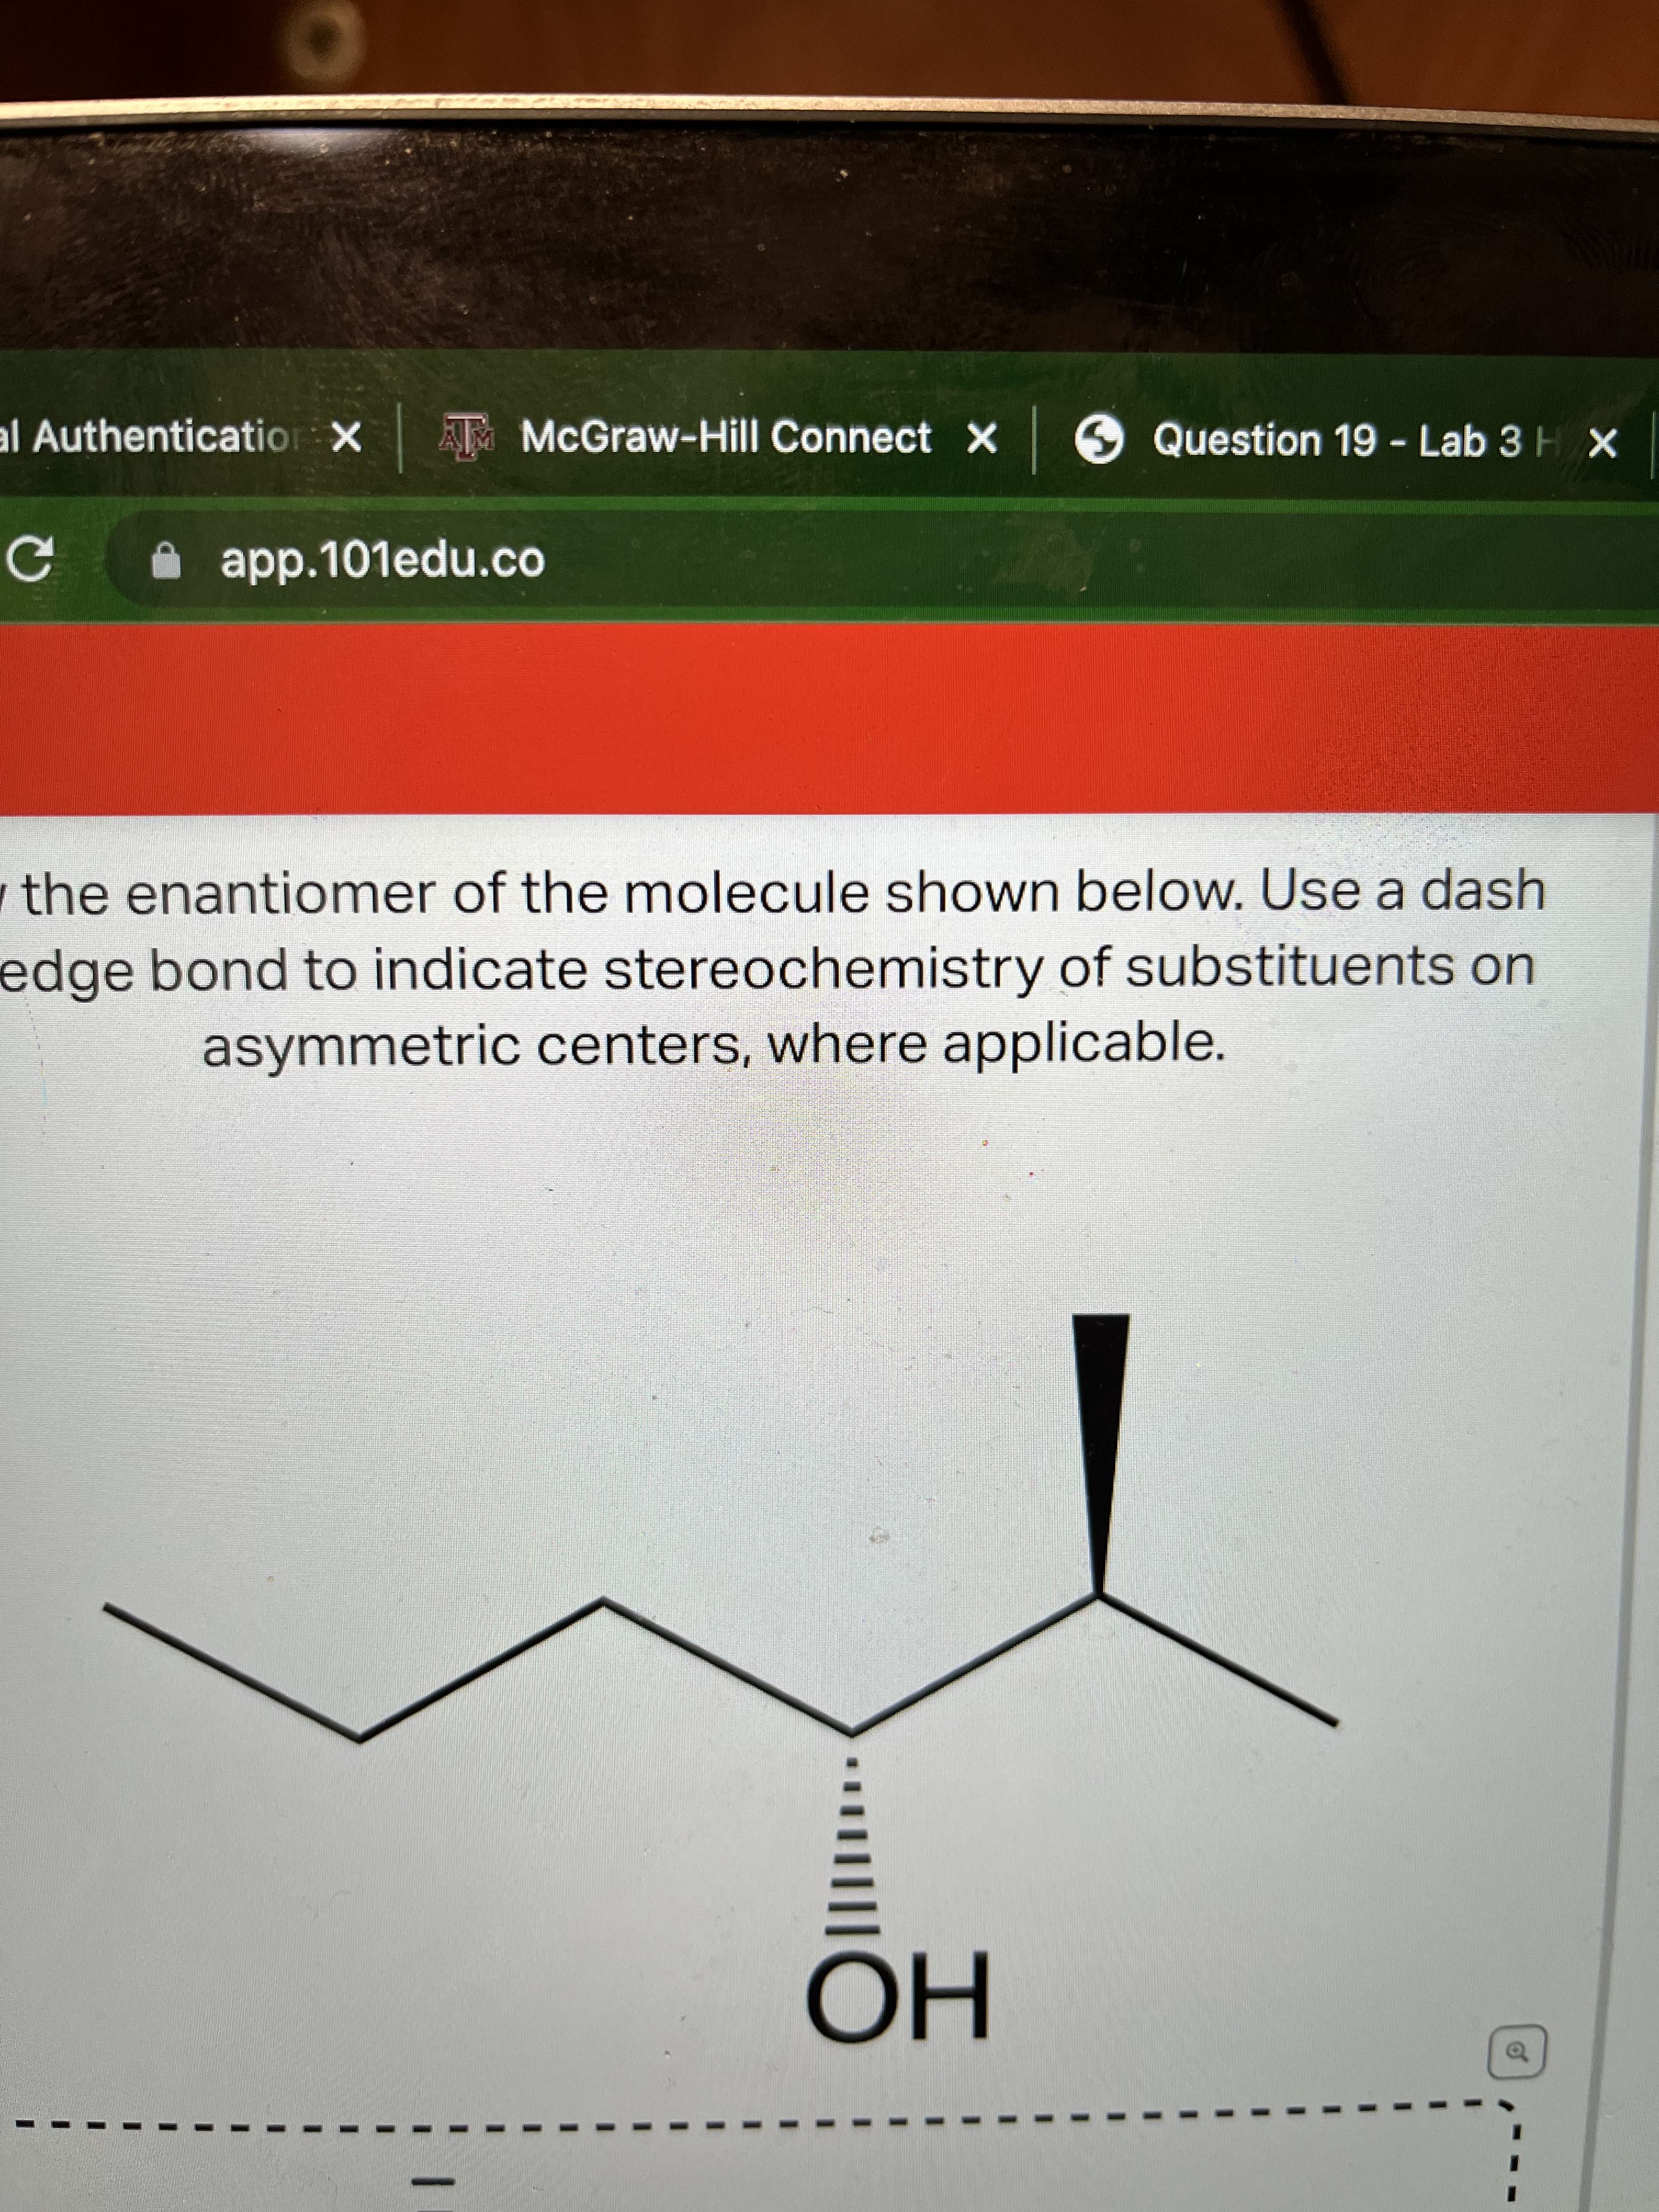 of
al Authenticatior X T McGraw-Hill Connect X 6 Question 19- Lab 3H X
A app.101edu.co
the enantiomer of the molecule shown below. Use a dash
edge bond to indicate stereochemistry of substituents on
asymmetric centers, where applicable.
но
